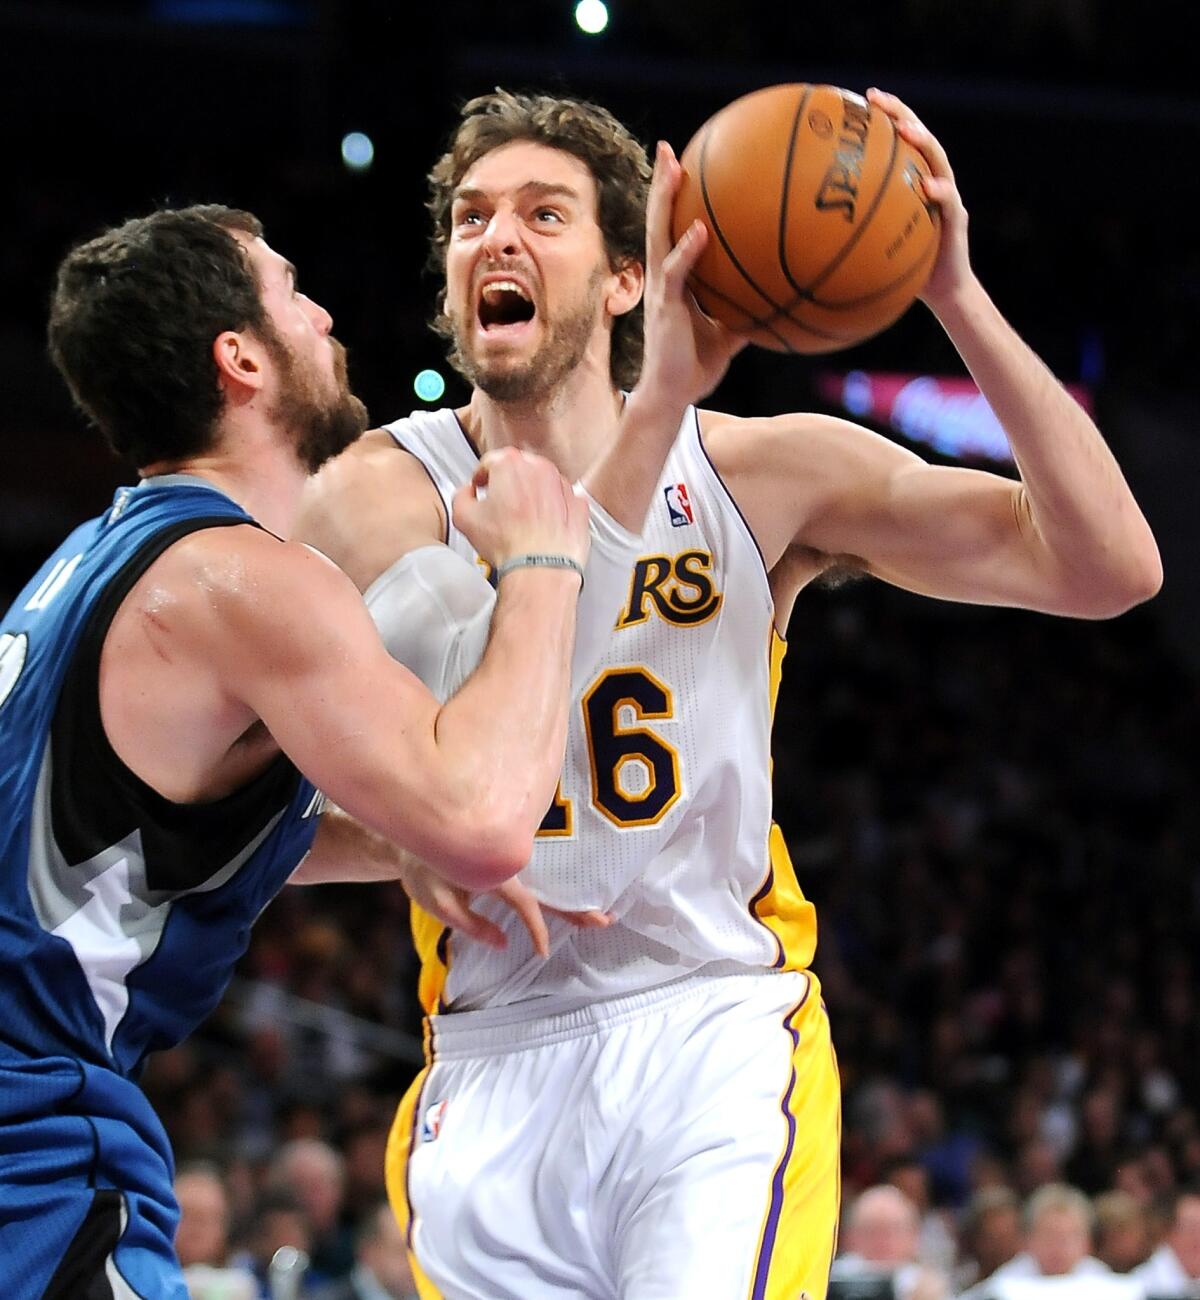 Lakers forward Pau Gasol, right, is fouled by Minnesota Timberwolves forward Kevin Love while driving to the basket during the first half of the Lakers' 113-90 loss Sunday at Staples Center.